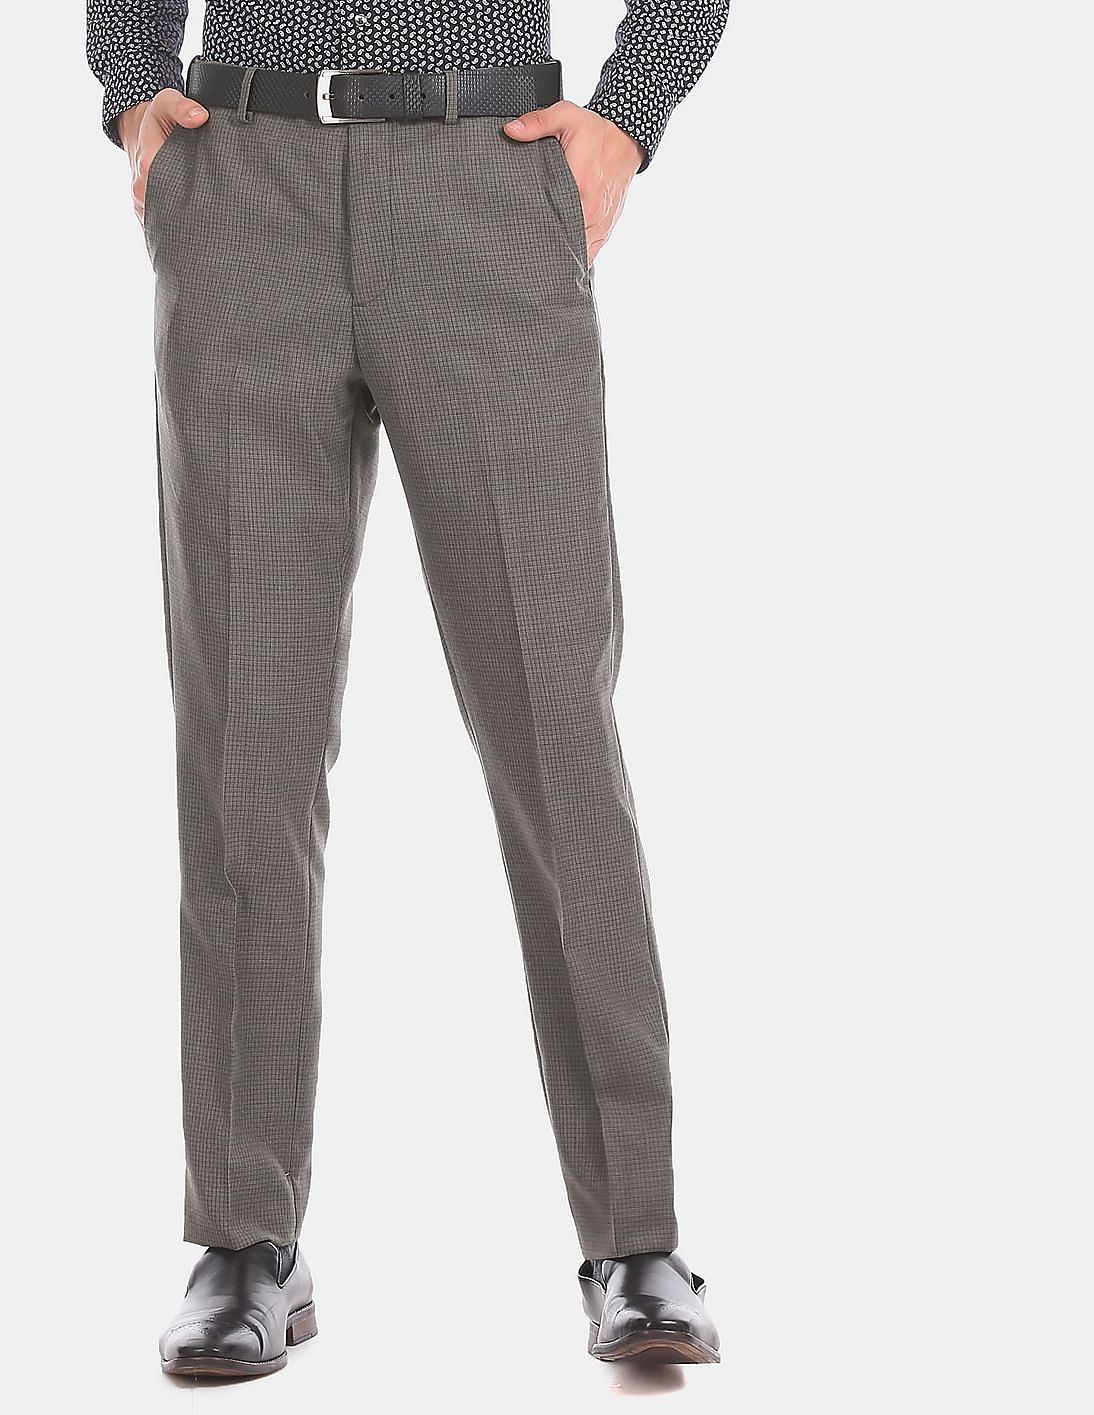 Buy Arrow Tapered Fit Patterned Wool Formal Trousers - NNNOW.com